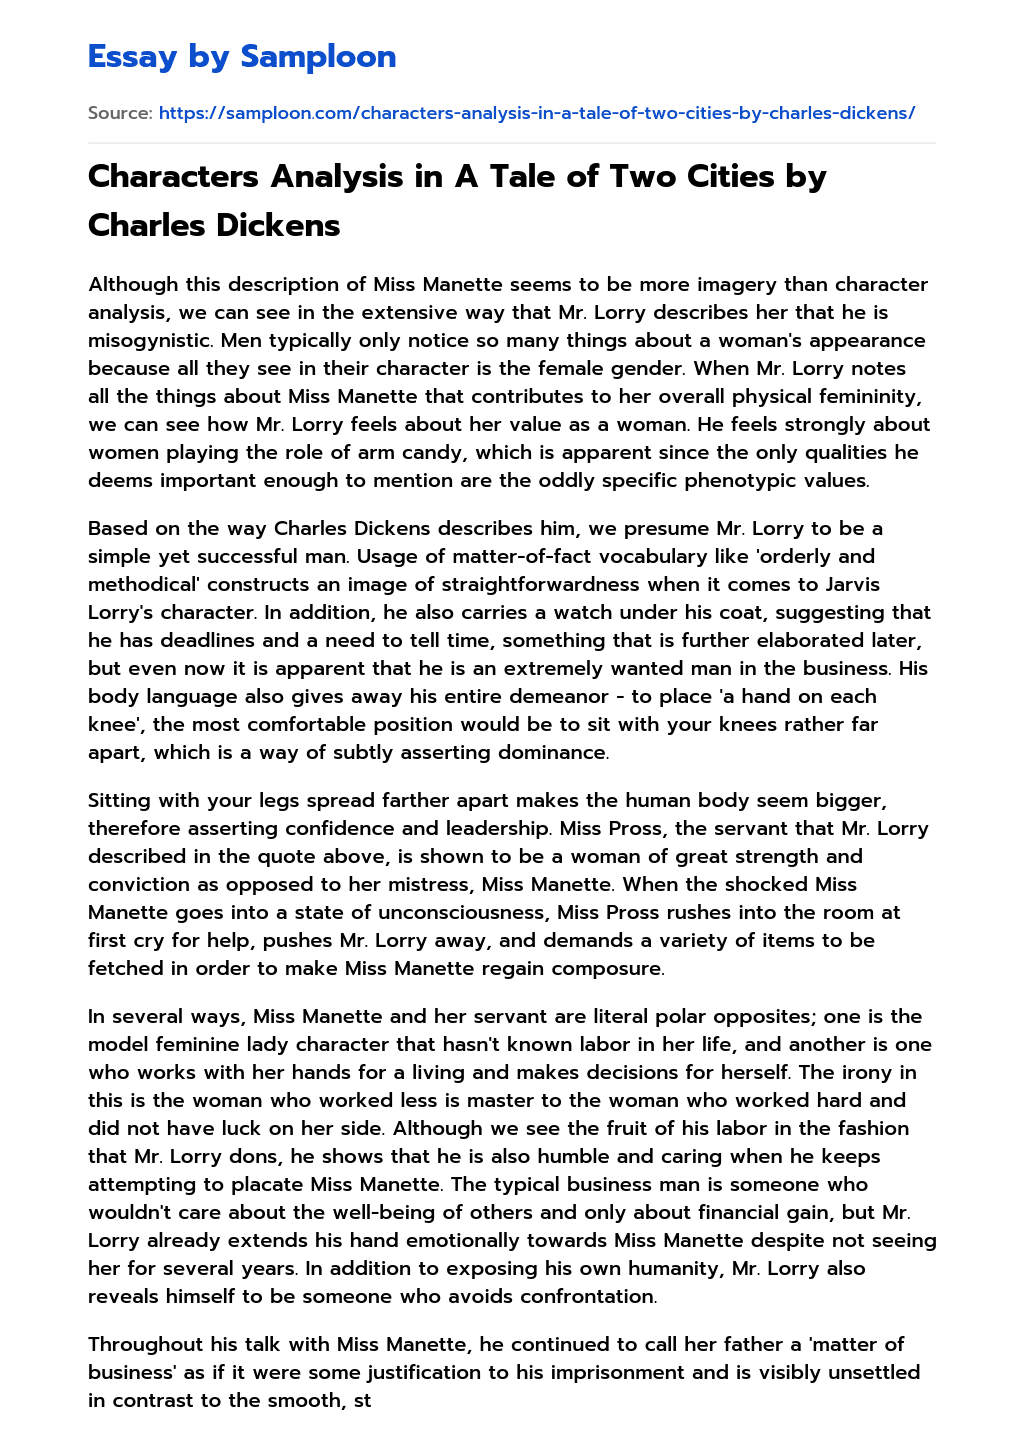 Characters Analysis in A Tale of Two Cities by Charles Dickens essay